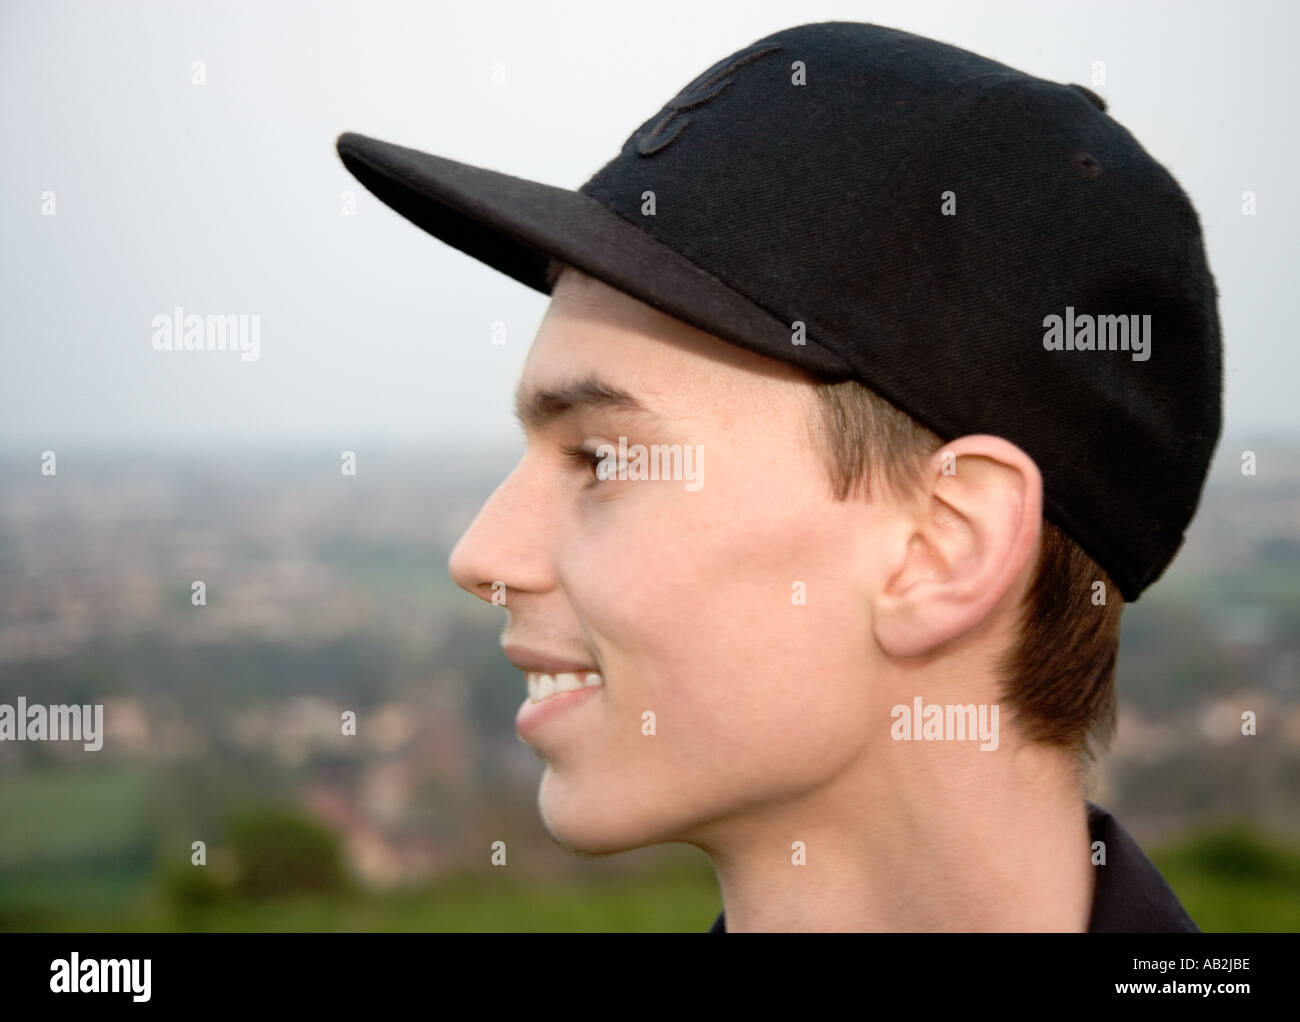 young-man-wearing-baseball-cap-smiling-portrait-side-view-close-up-AB2JBE.jpg